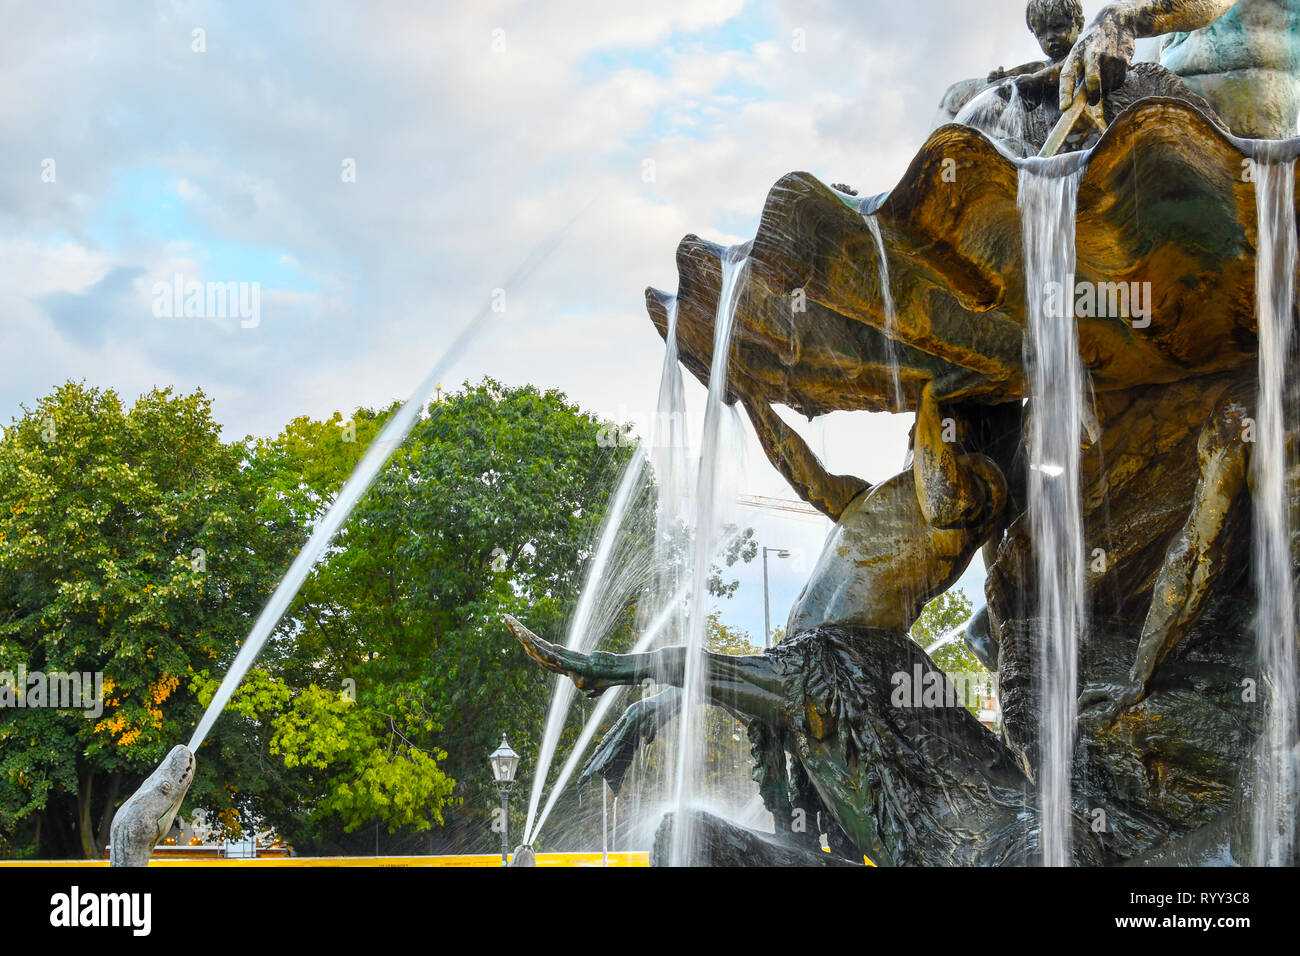 Time lapse creating solid streams of water shooting from a snake's mouth and surrounding the leg of a satyr on the Neptune Fountain in Berlin Germany Stock Photo